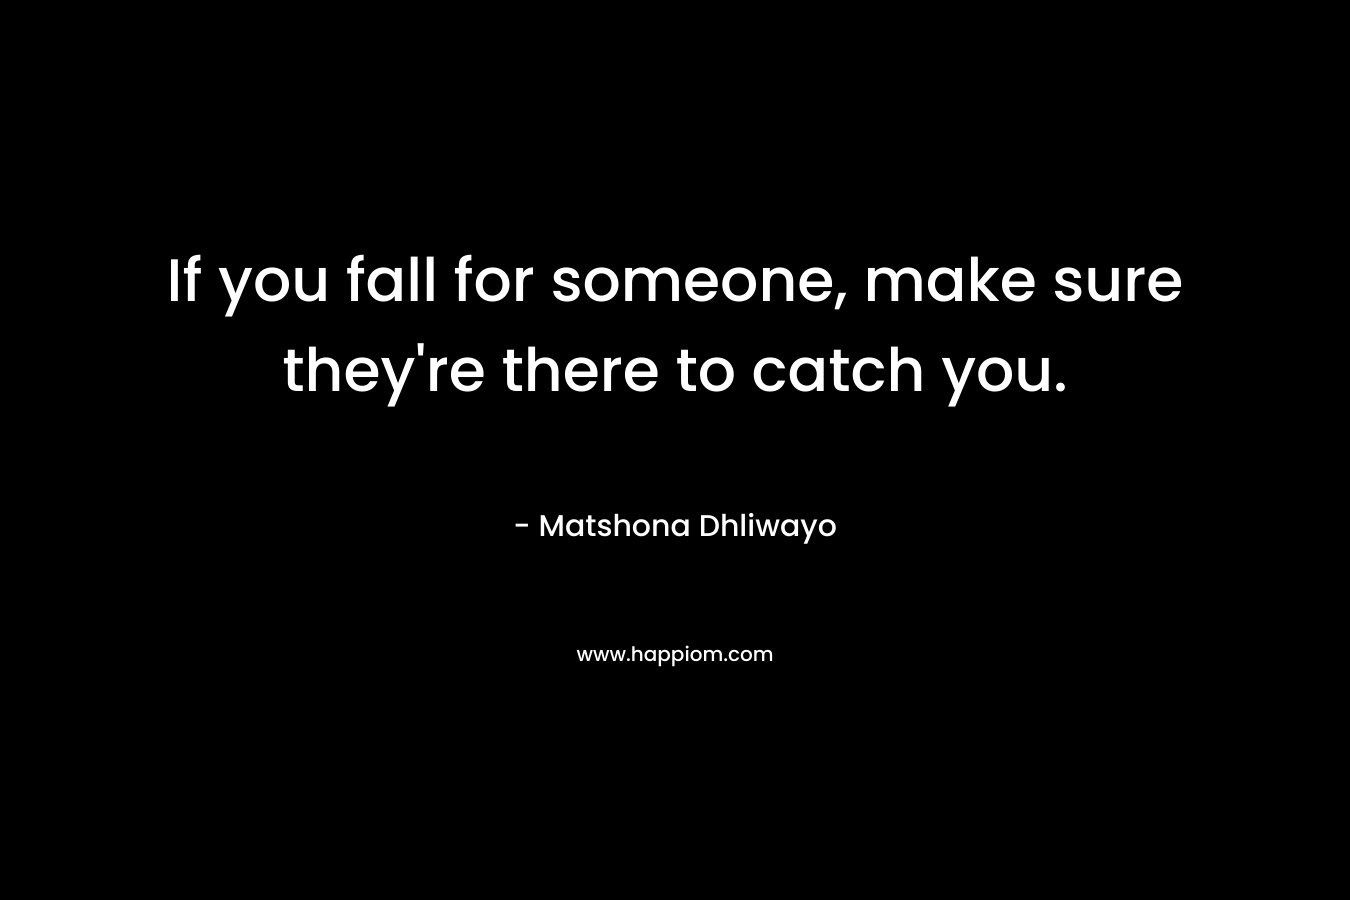 If you fall for someone, make sure they're there to catch you.